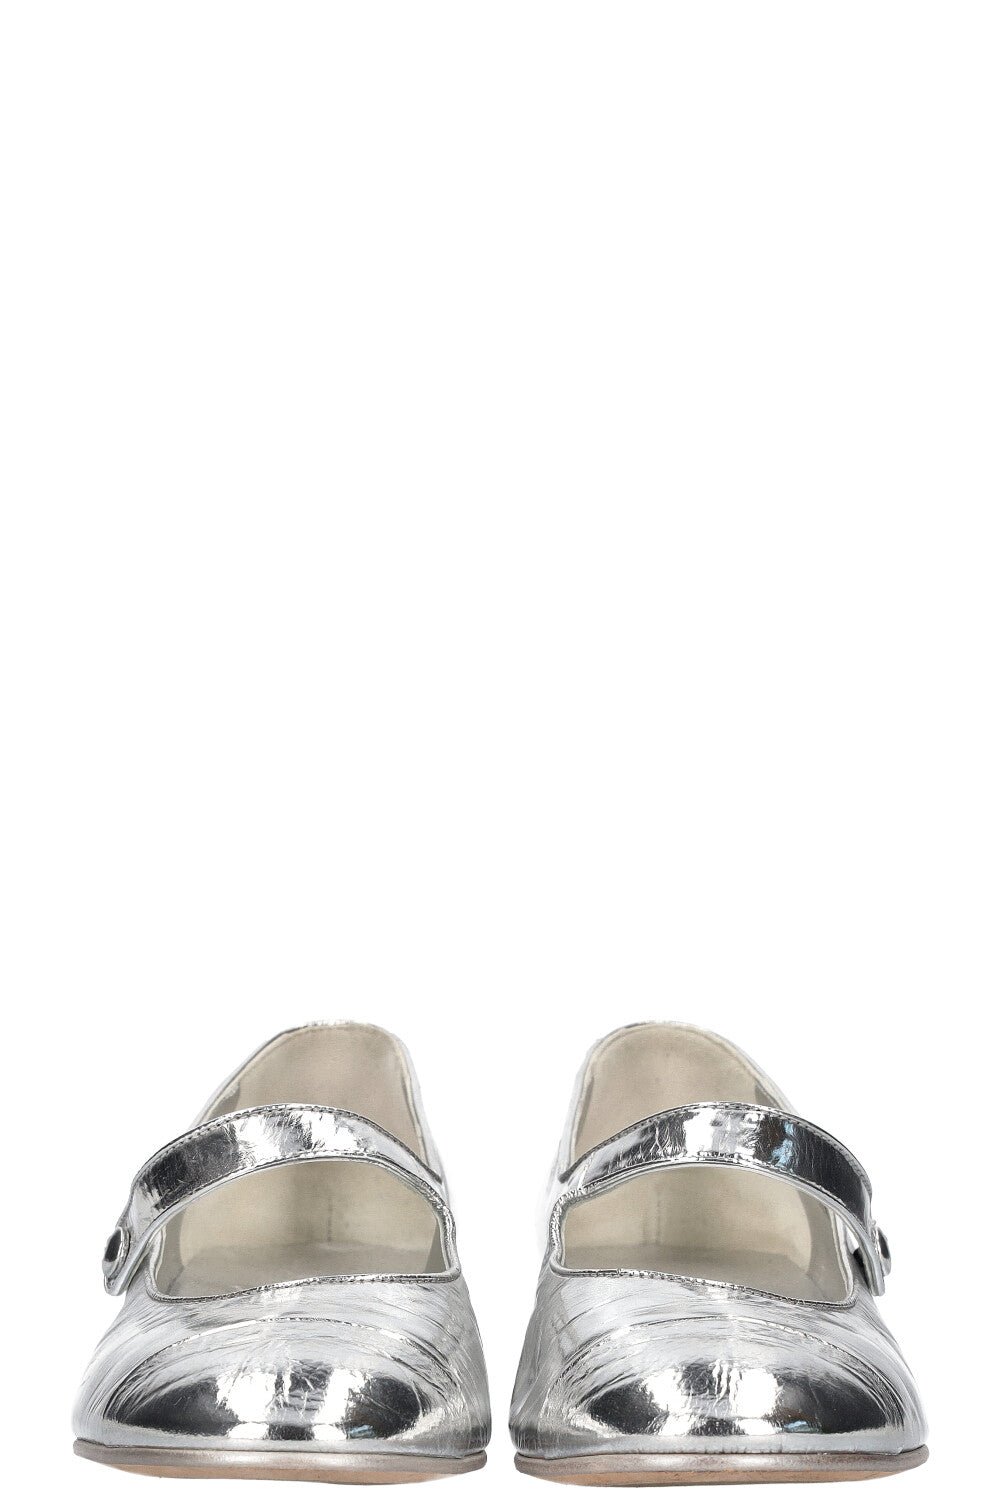 CHANEL Mary Jane Pumps Silver 2019